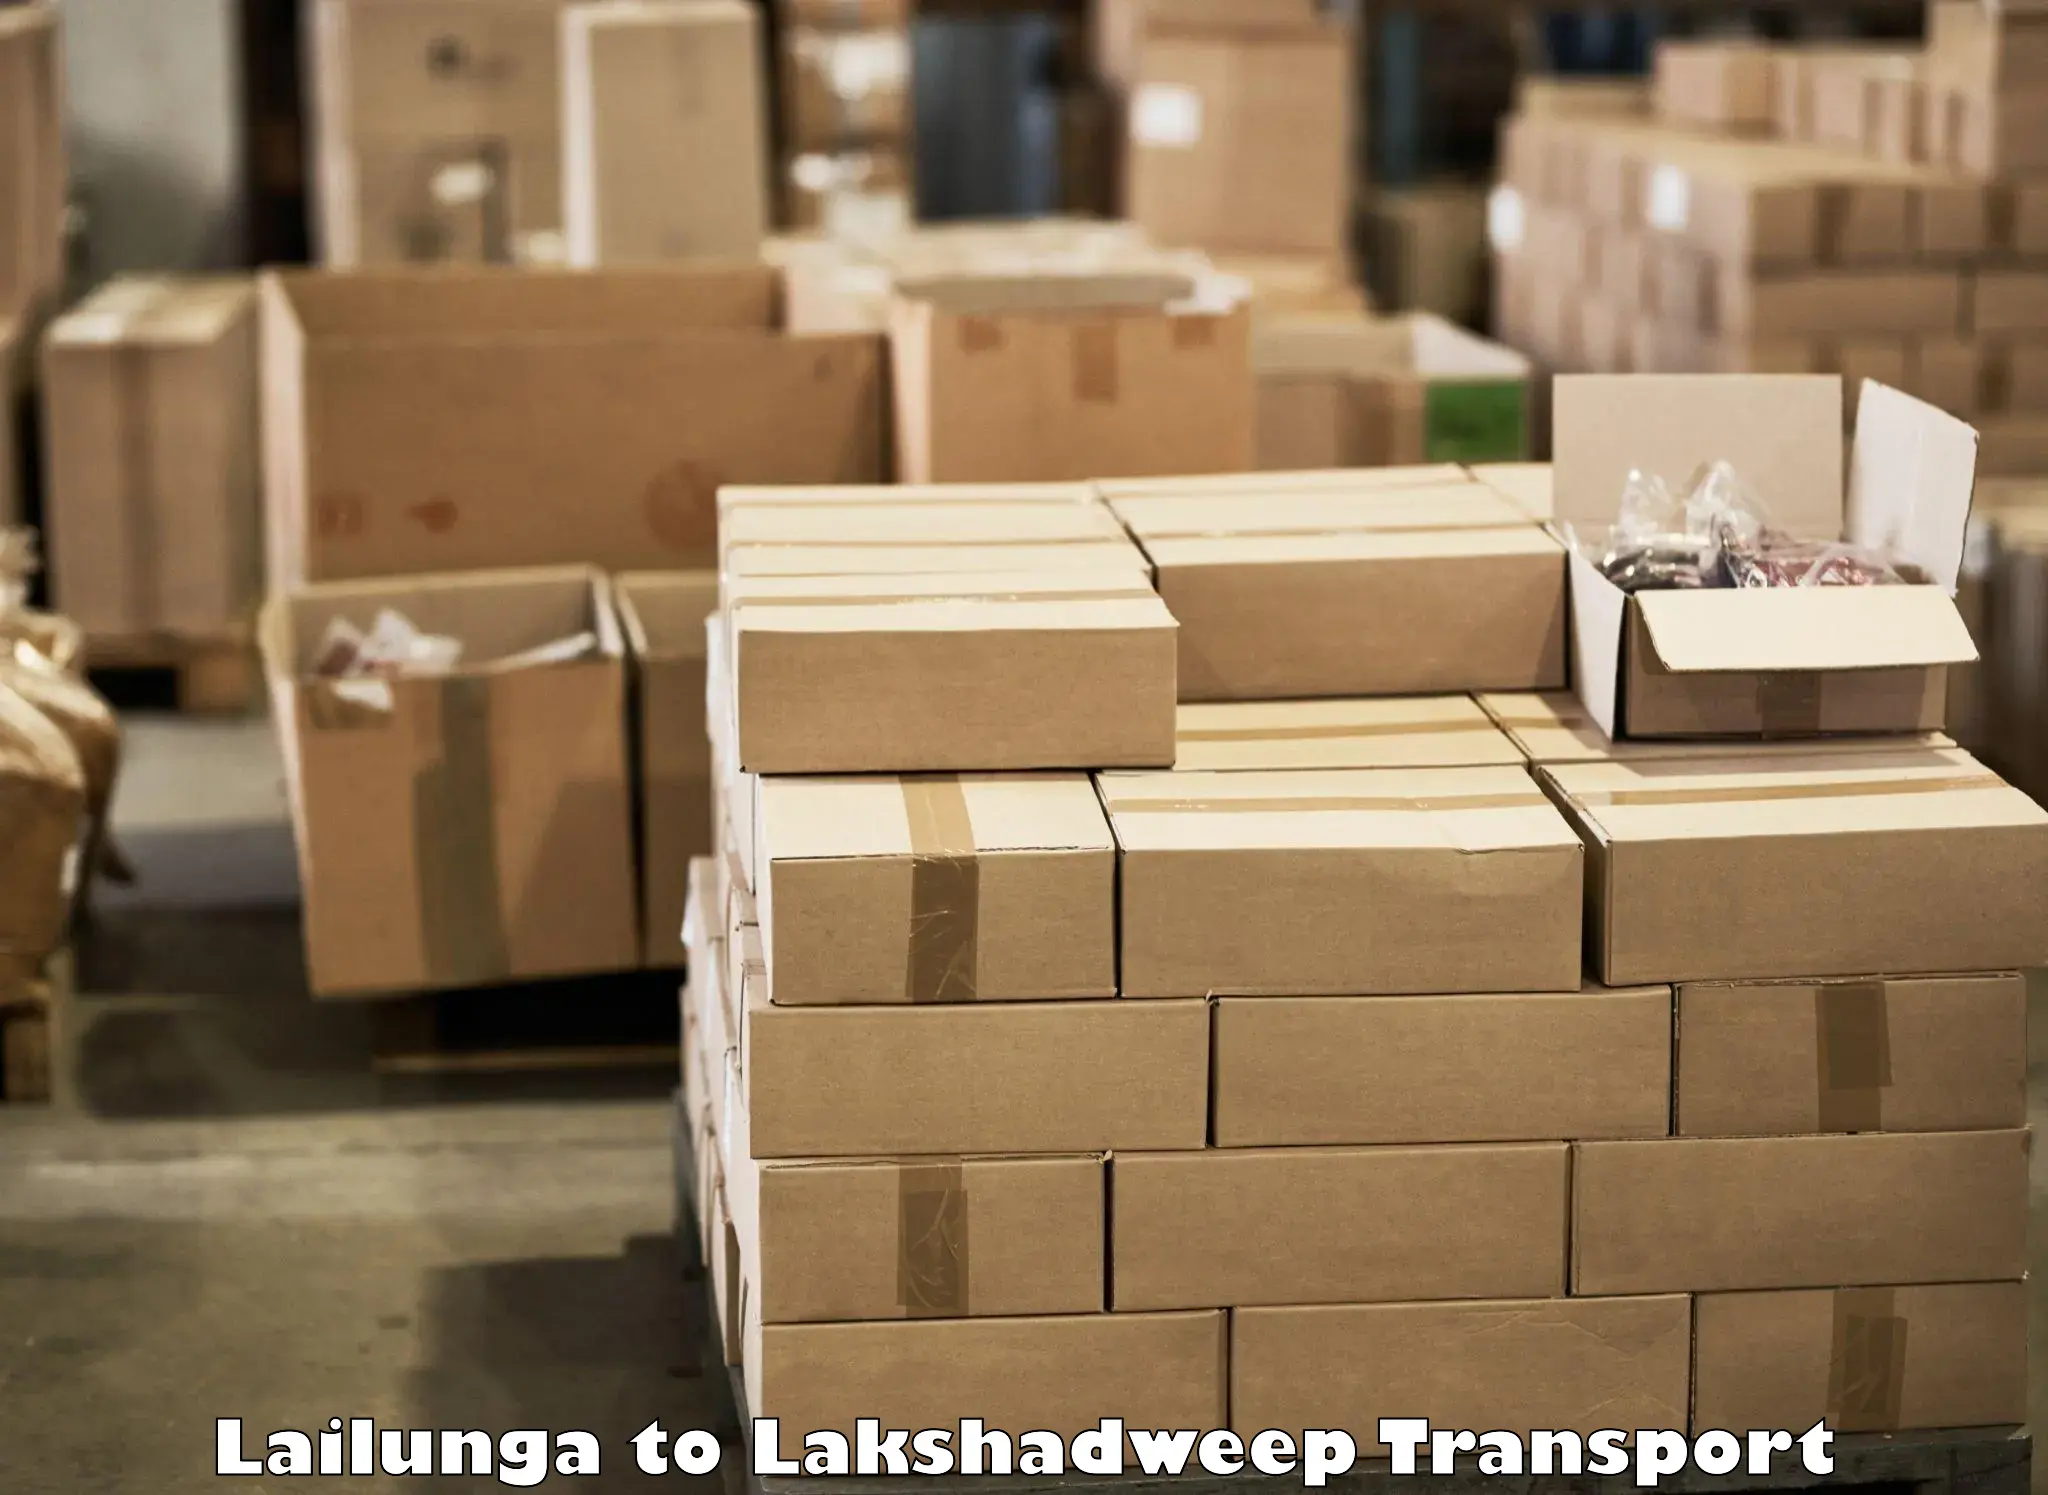 Container transport service Lailunga to Lakshadweep